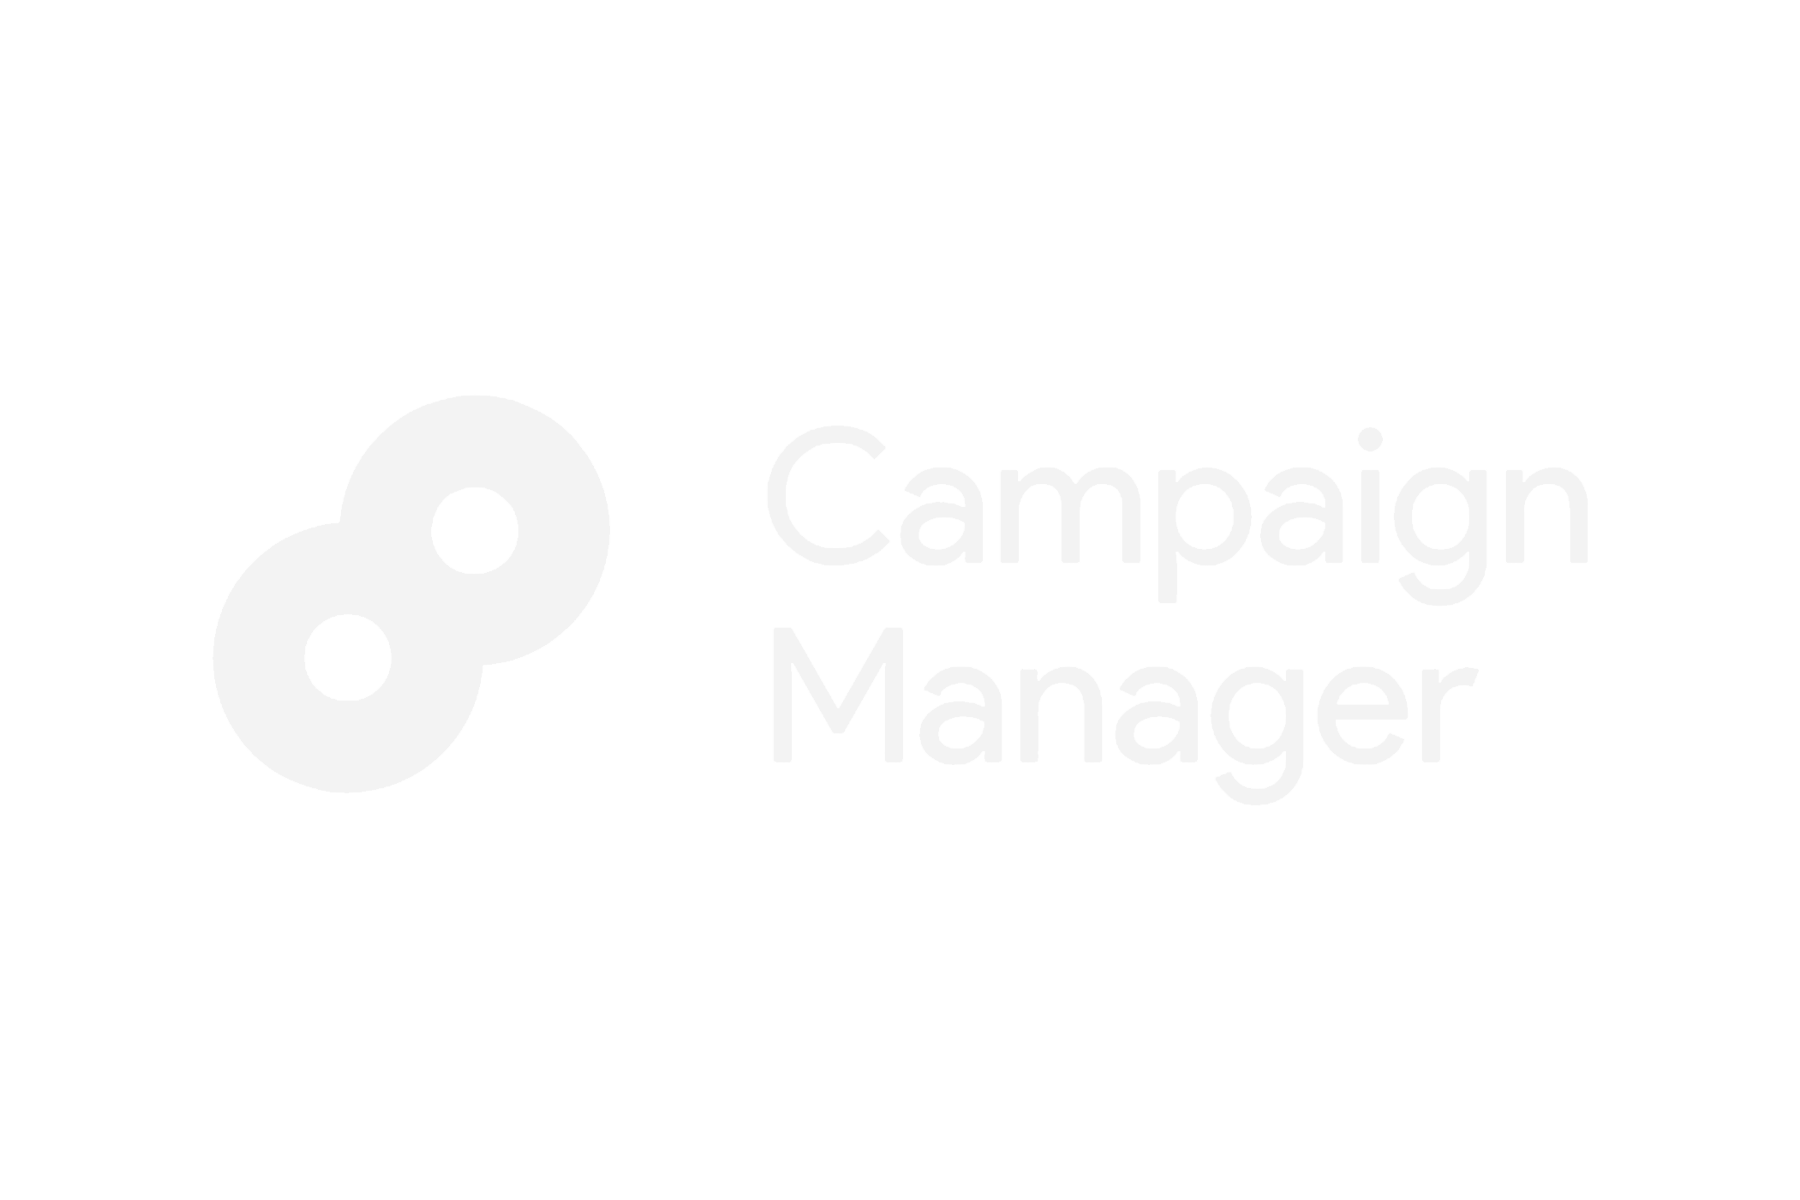 Campaign Manager (Copy)